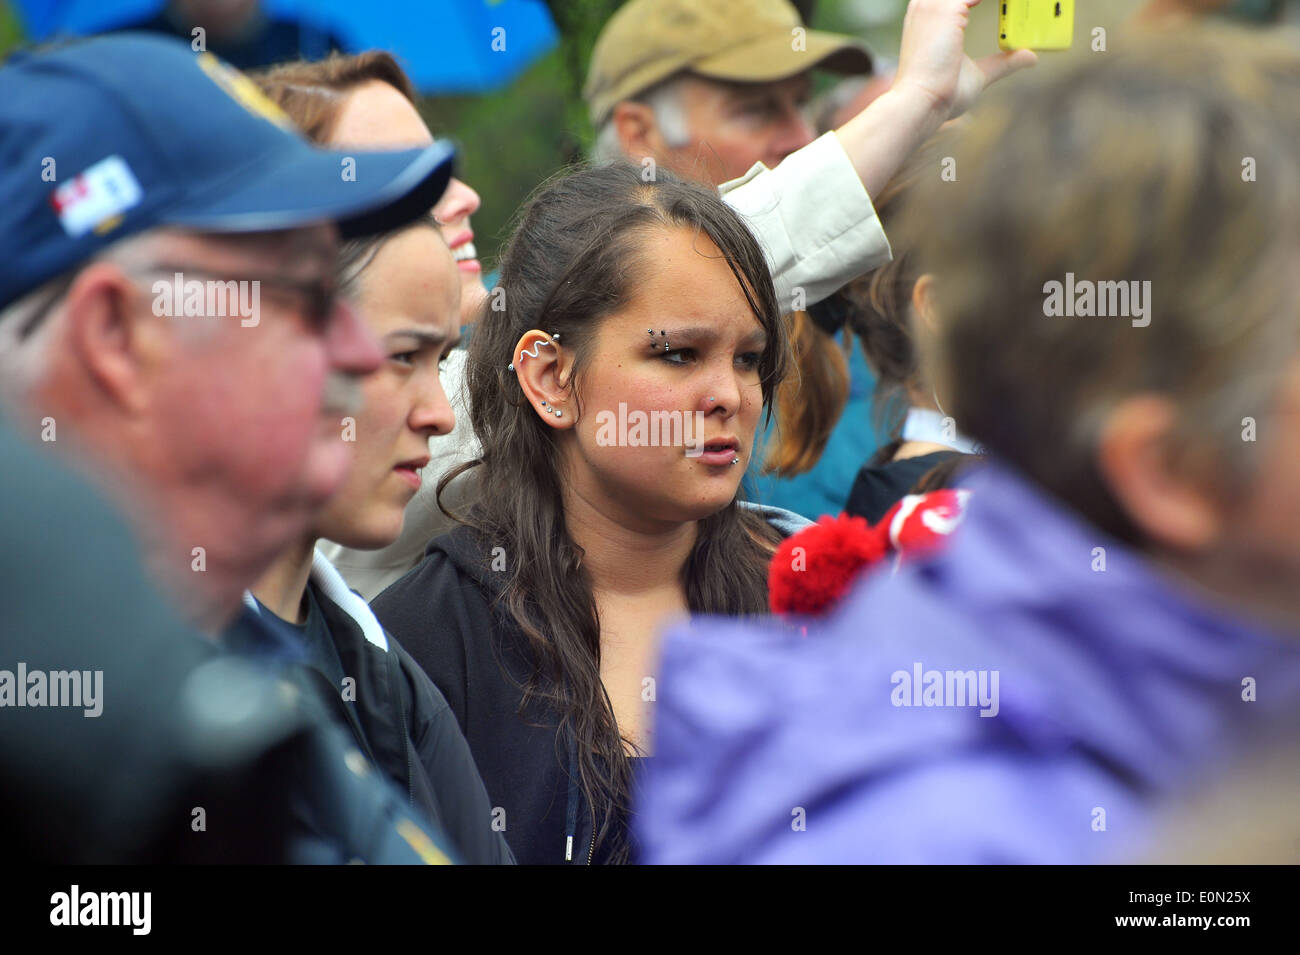 A woman with many piercings stand amidst a crowd. Stock Photo